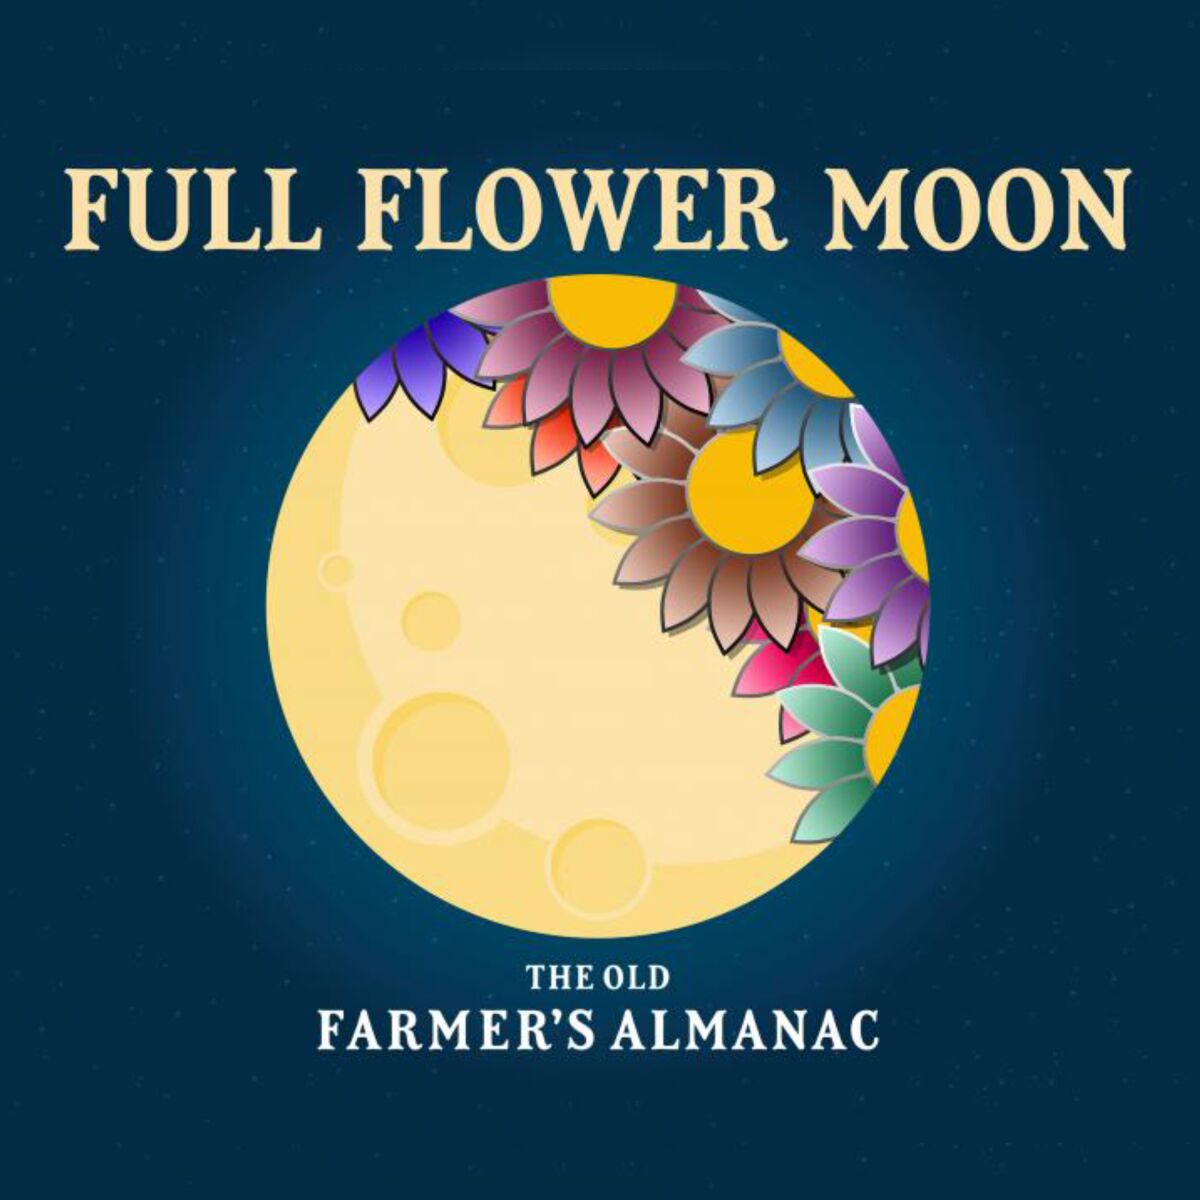 Illustration of moon embellished with flowers.